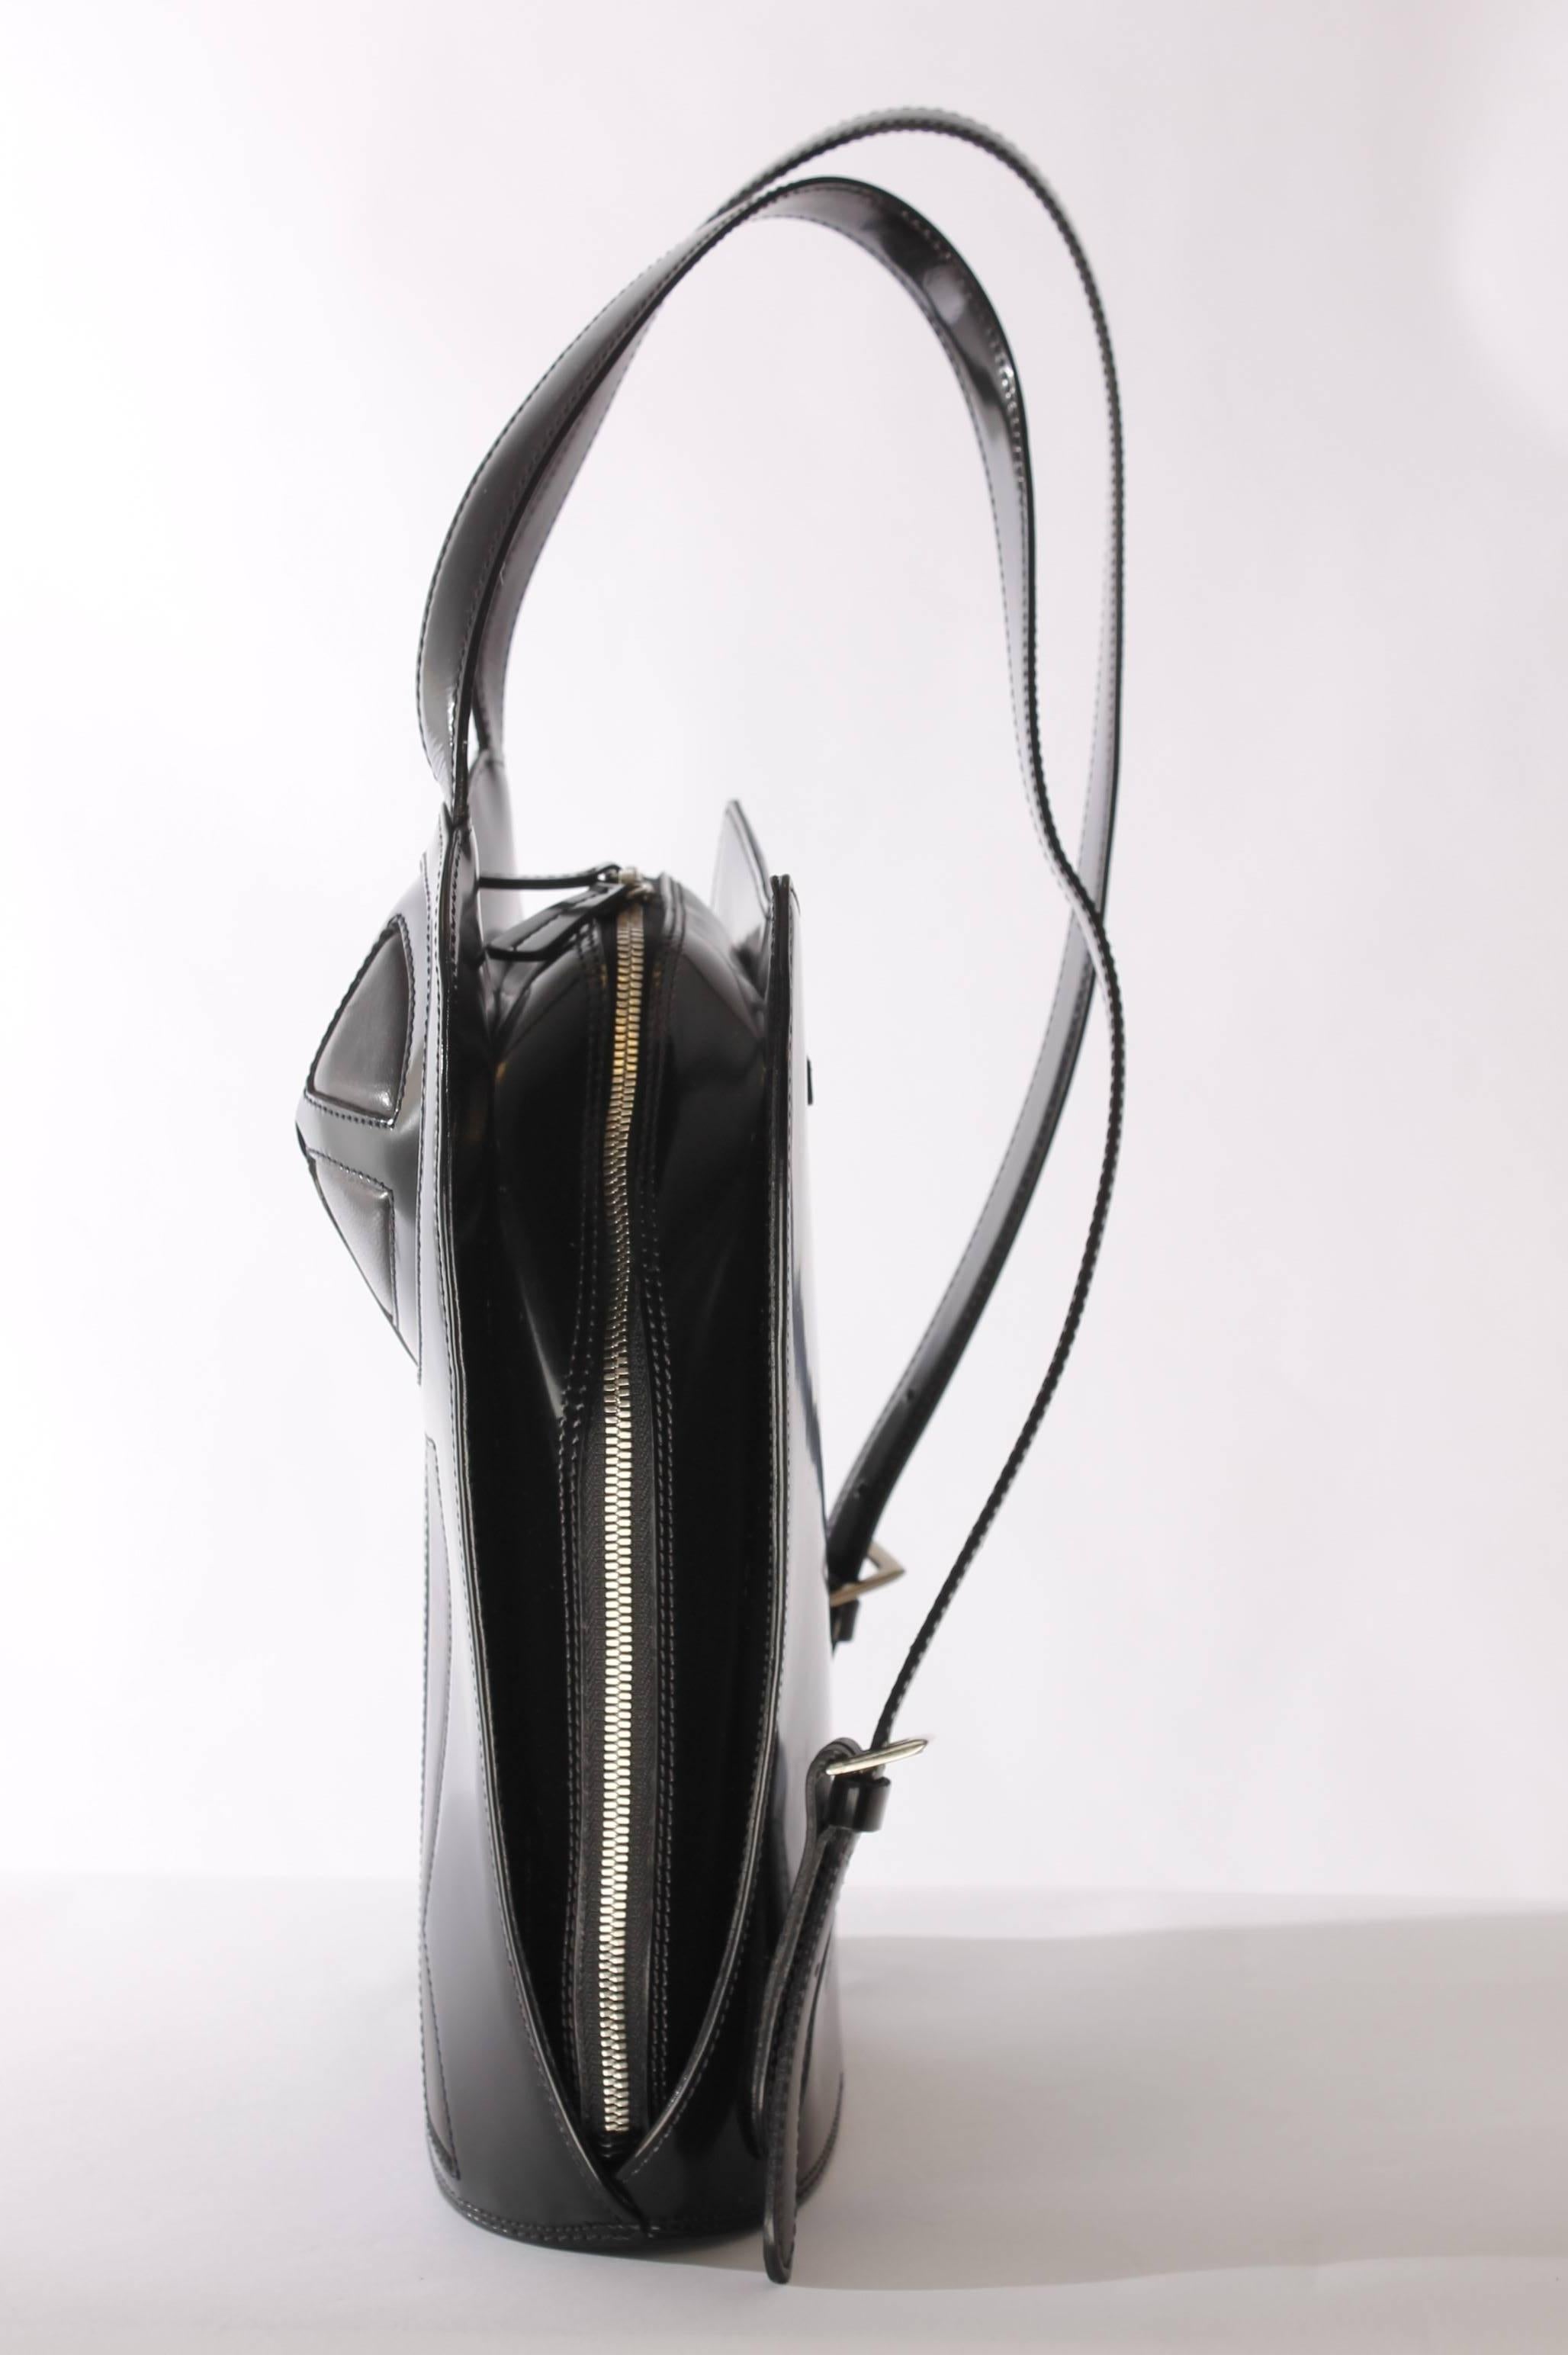 Unique and rare backpack by Jean Paul Gaultier, reminiscent of Madonna's Blond Ambition tour.

Made of shiny black hardshell leather, at the front the well known bustier Madonna wore during her tour. A very beloved vintage item from 1998. Two